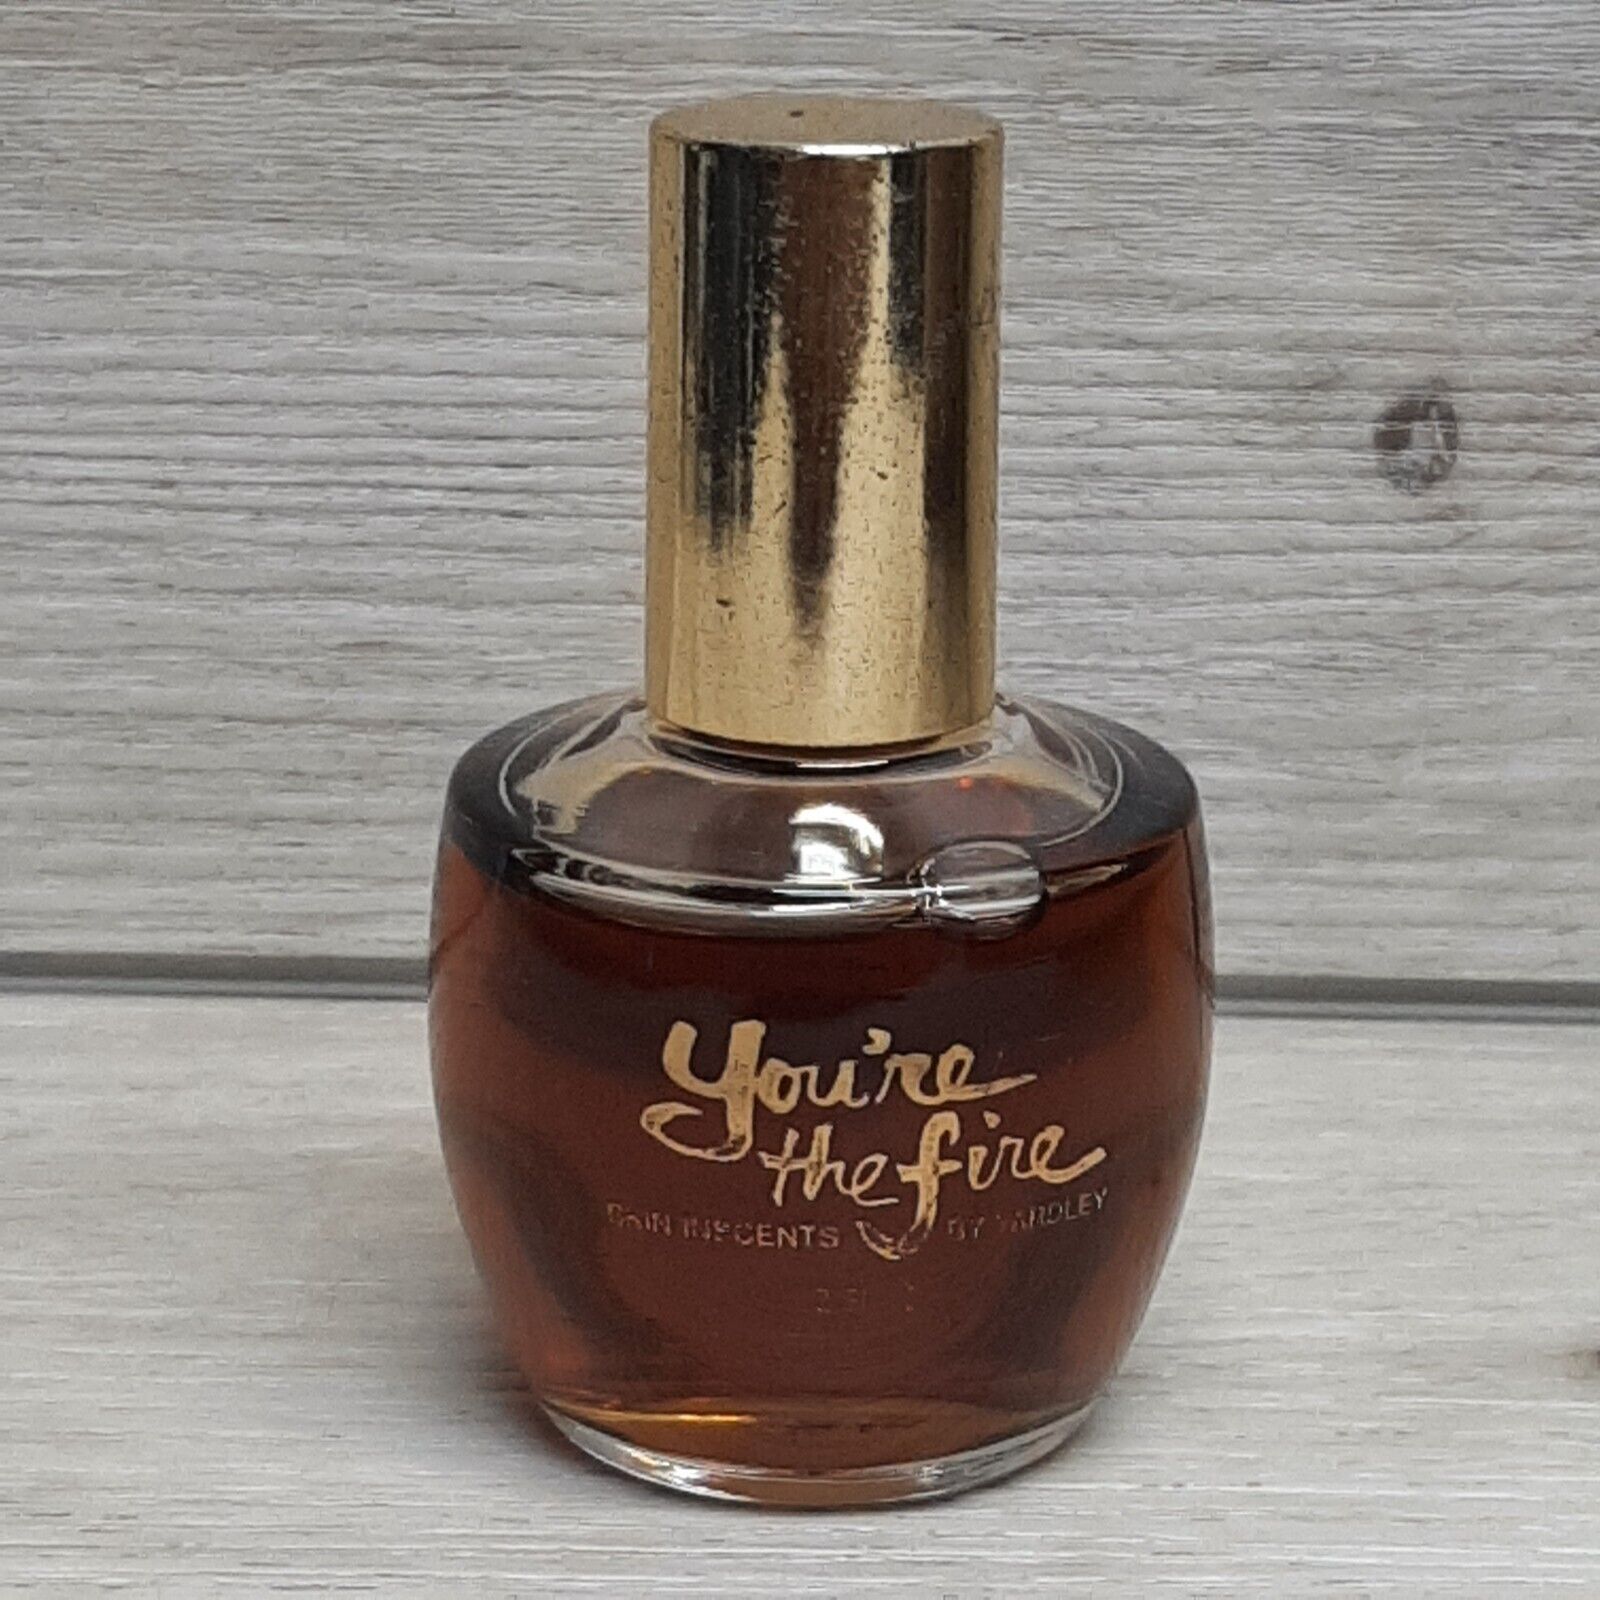 Vintage You’re The Fire Skin Inscents By Yardley 2 FL OZ 99.99% Full